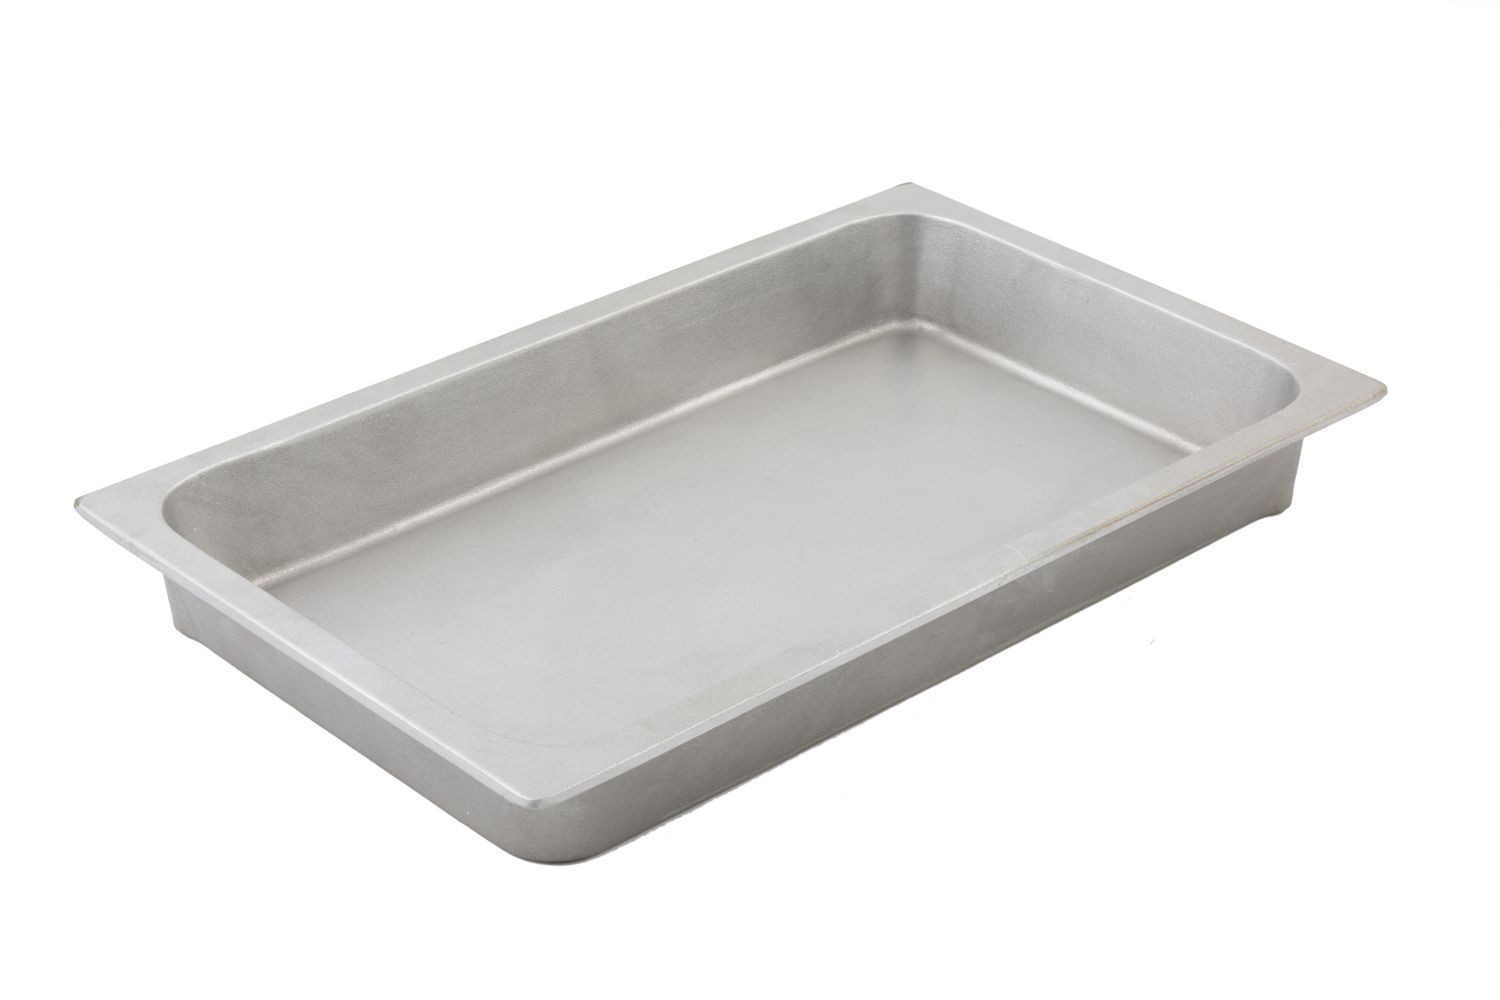 Bon Chef 5066P Full-Size Chafer Food Pan, Pewter Glo 21" x 13" x 2 3/4"